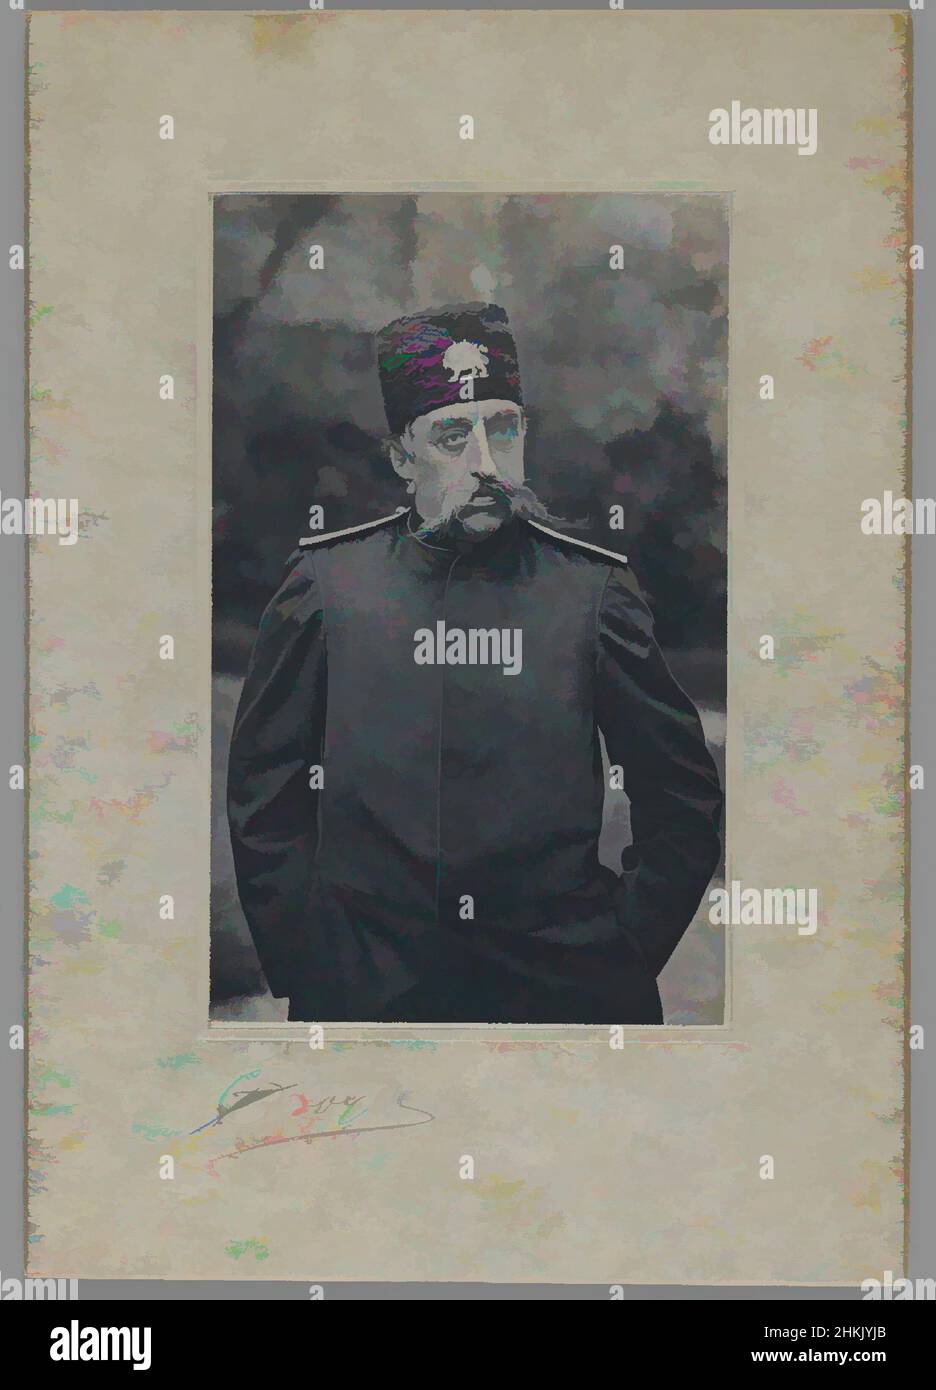 Art inspired by A Carte de Visite with Portrait of Mozaffar al-Din Shah, One of 274 Vintage Photographs, Gelatin silver printing out paper mounted on carte de visite, late 19th-early 20th century, Qajar, Qajar Period, Photograph: 3 13/16 x 2 7/16 in., 9.7 x 6.2 cm, azarbaijan, black and, Classic works modernized by Artotop with a splash of modernity. Shapes, color and value, eye-catching visual impact on art. Emotions through freedom of artworks in a contemporary way. A timeless message pursuing a wildly creative new direction. Artists turning to the digital medium and creating the Artotop NFT Stock Photo